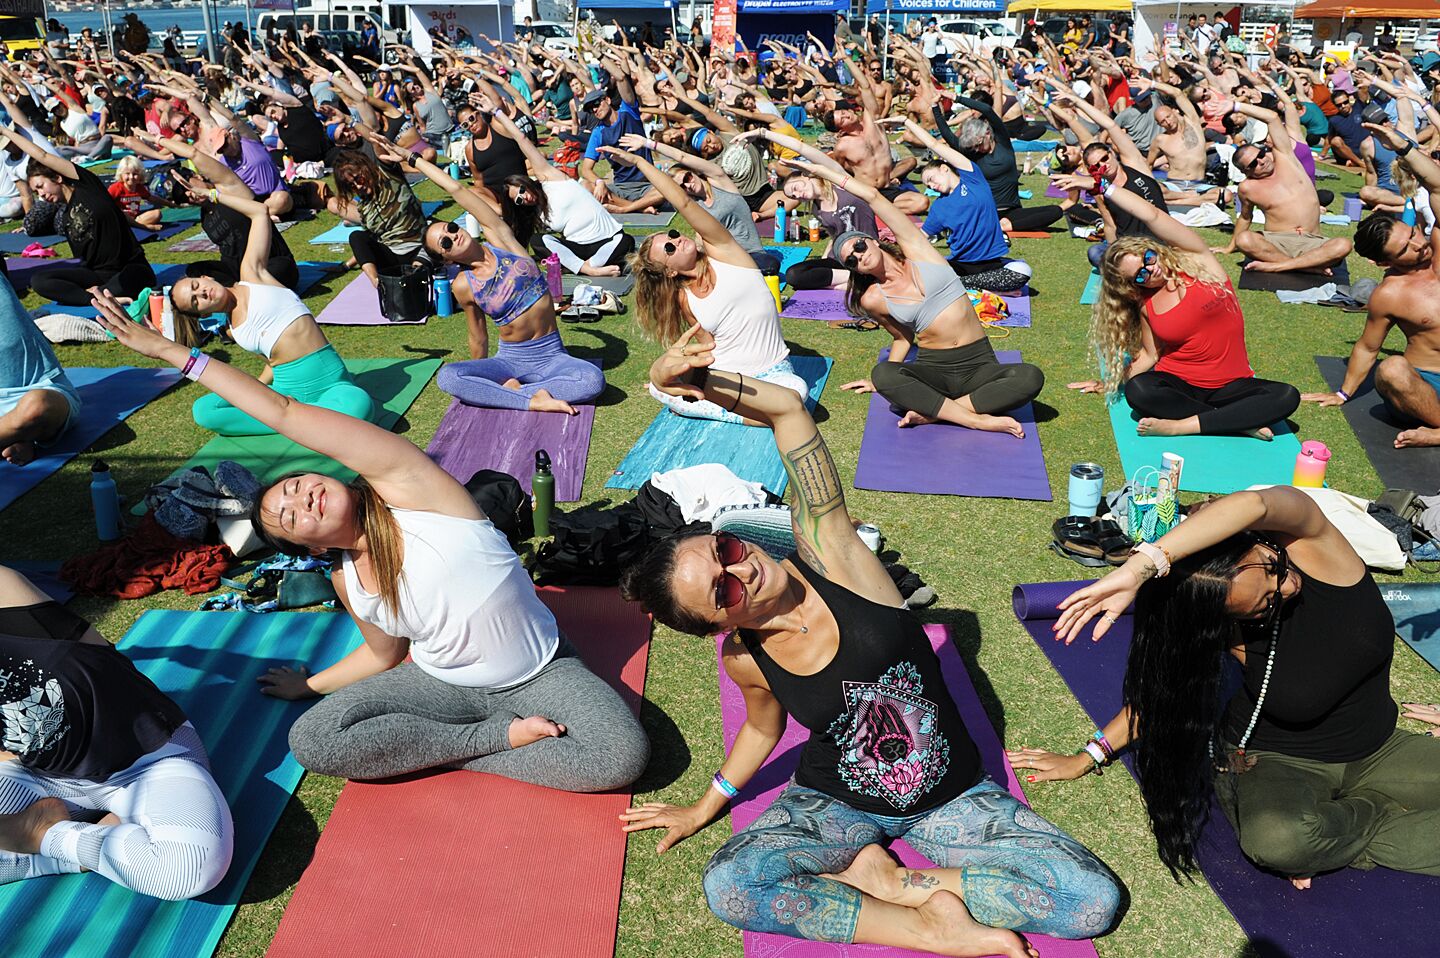 Yogis got their downward dog on at the One Love Movement's 8th Annual Charity Yoga & Live Music Event at Waterfront Park on Saturday, Sept. 21, 2019.